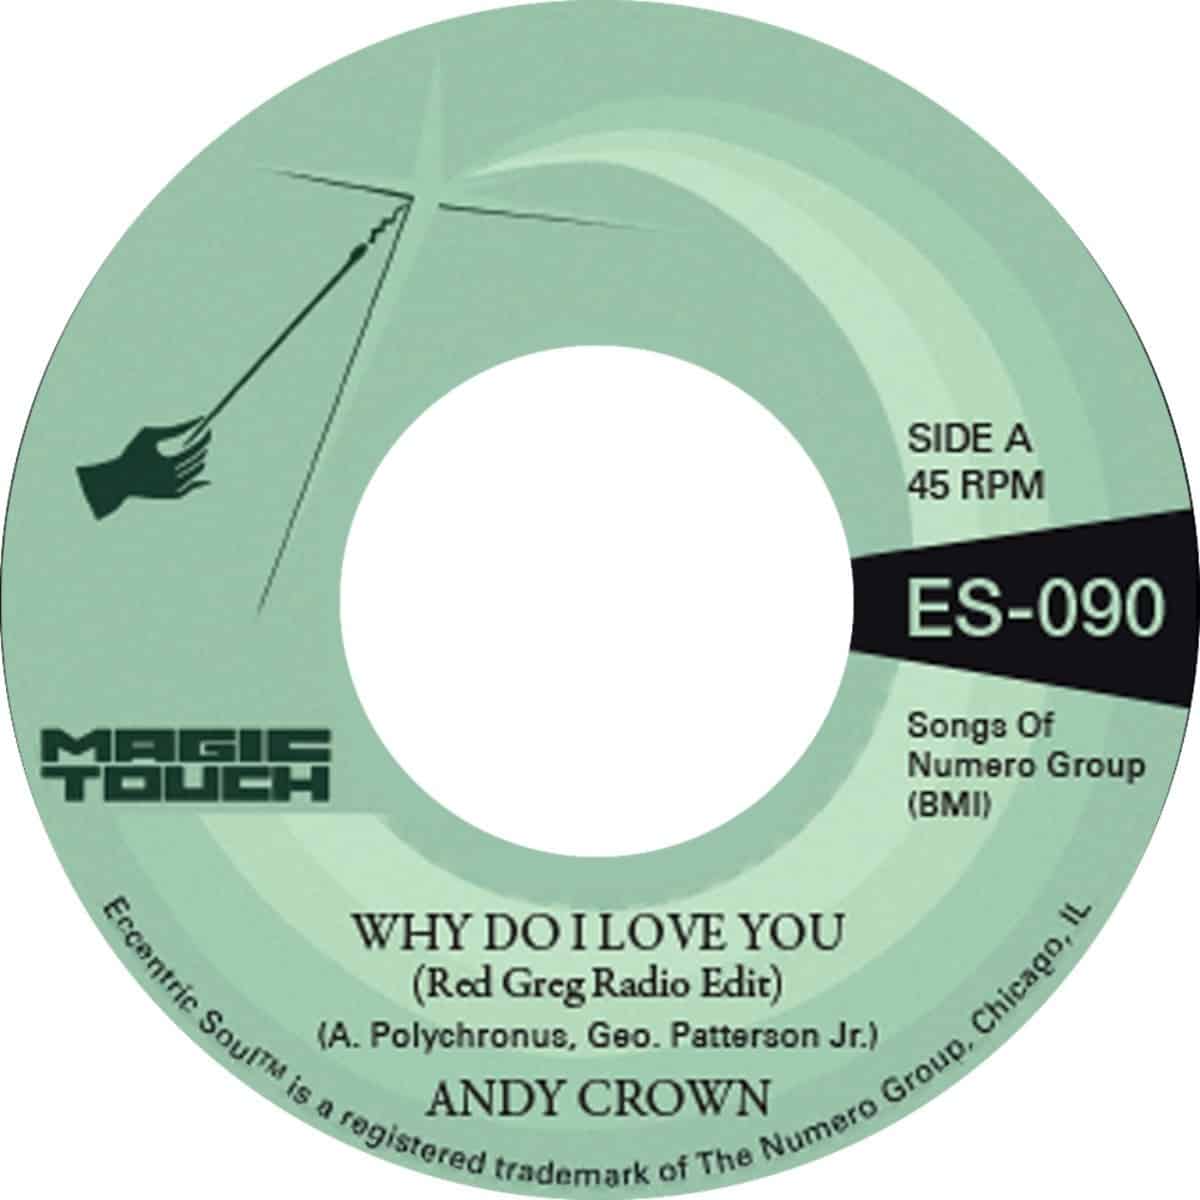 ANDY CROWN - Why Do I Love You / Why Do I Love You (Instrumental) - 7" - Coke Bottle Clear Vinyl [NOV 10]